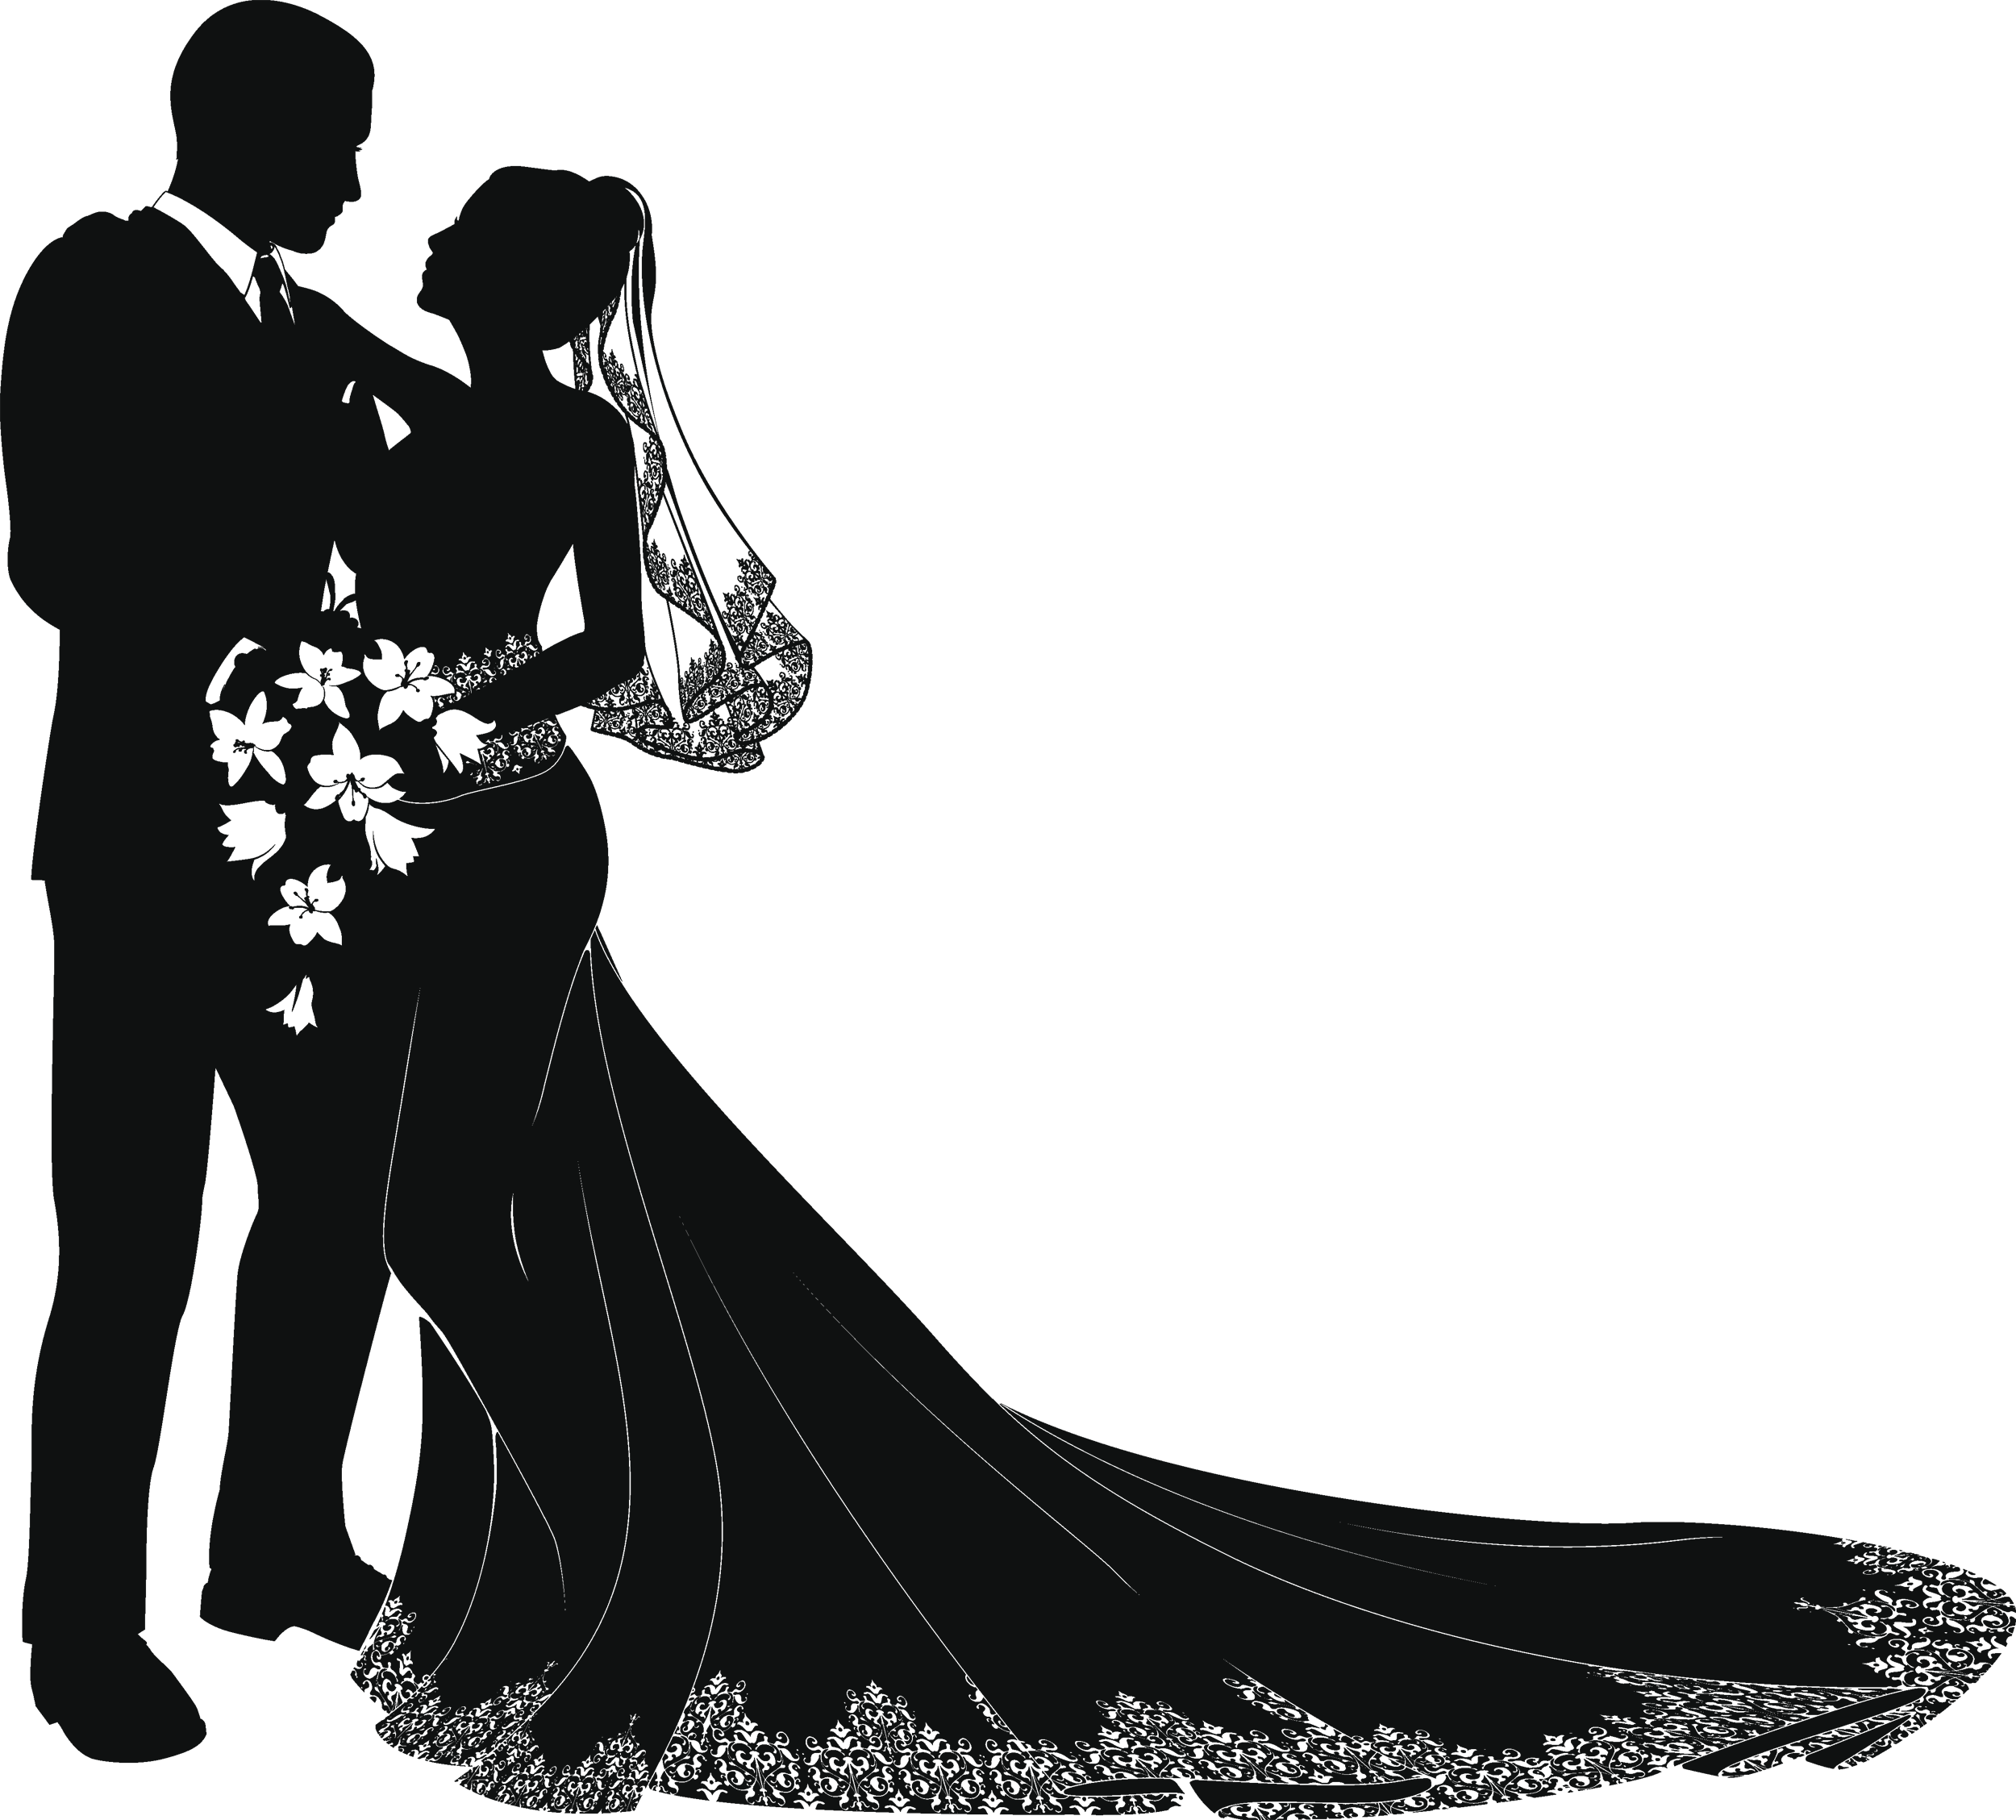 marriage clipart happy relationship